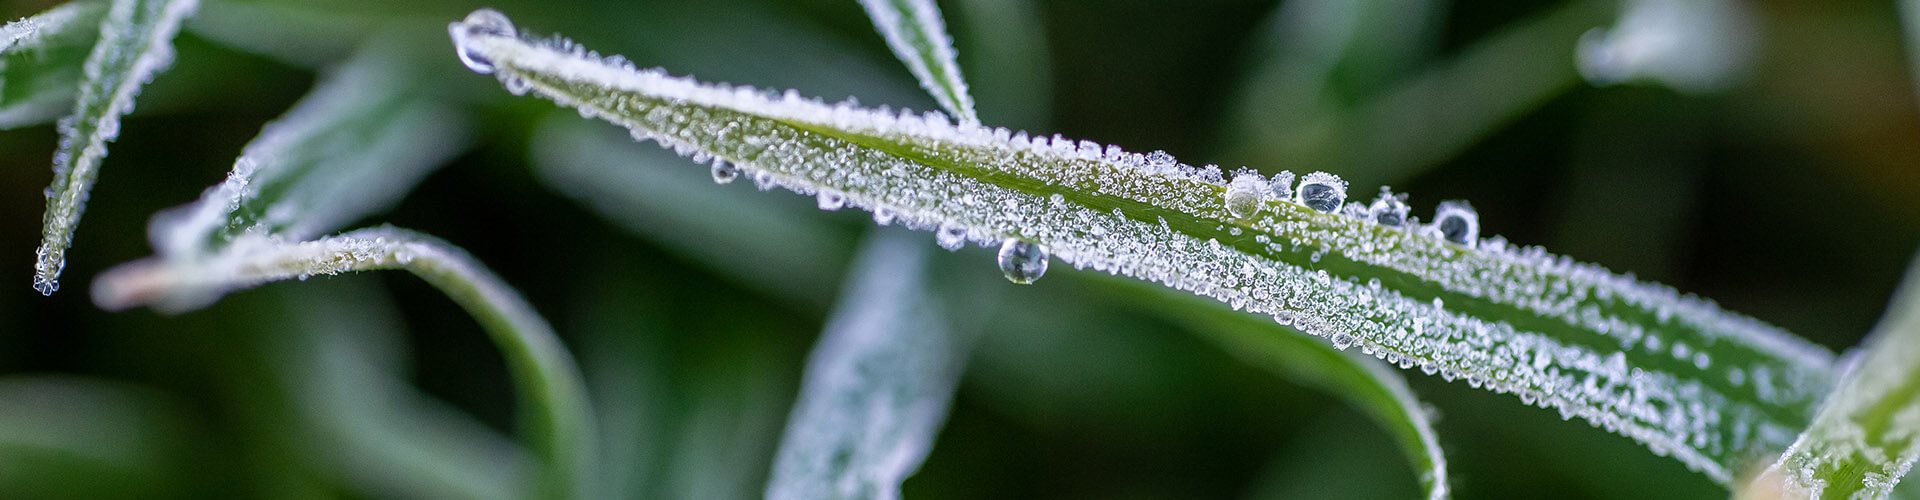 frost on a blade of grass